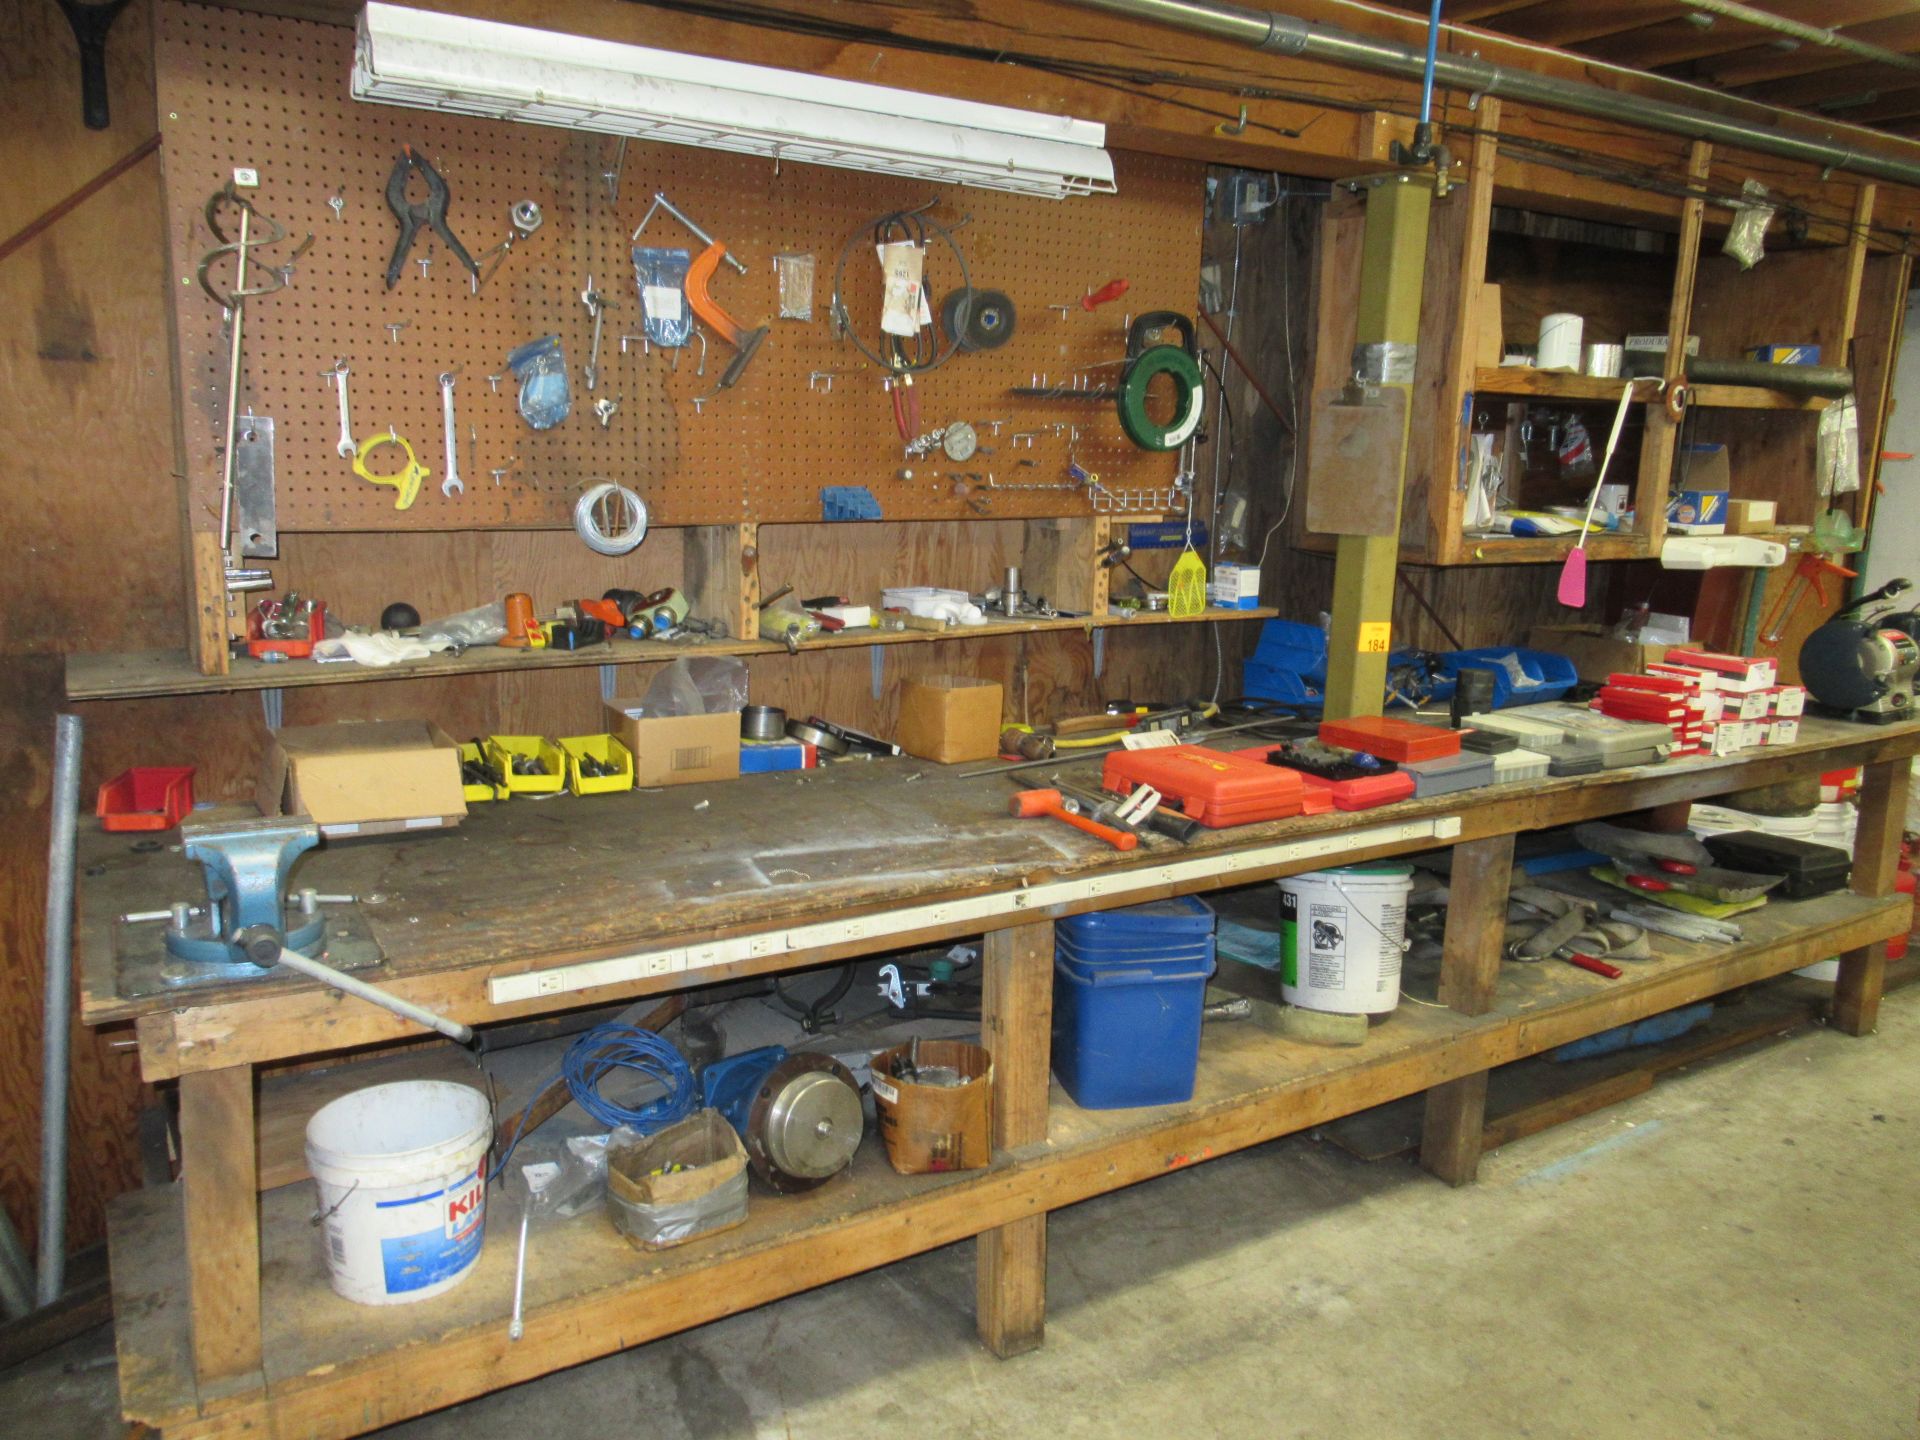 Work Bench Contents